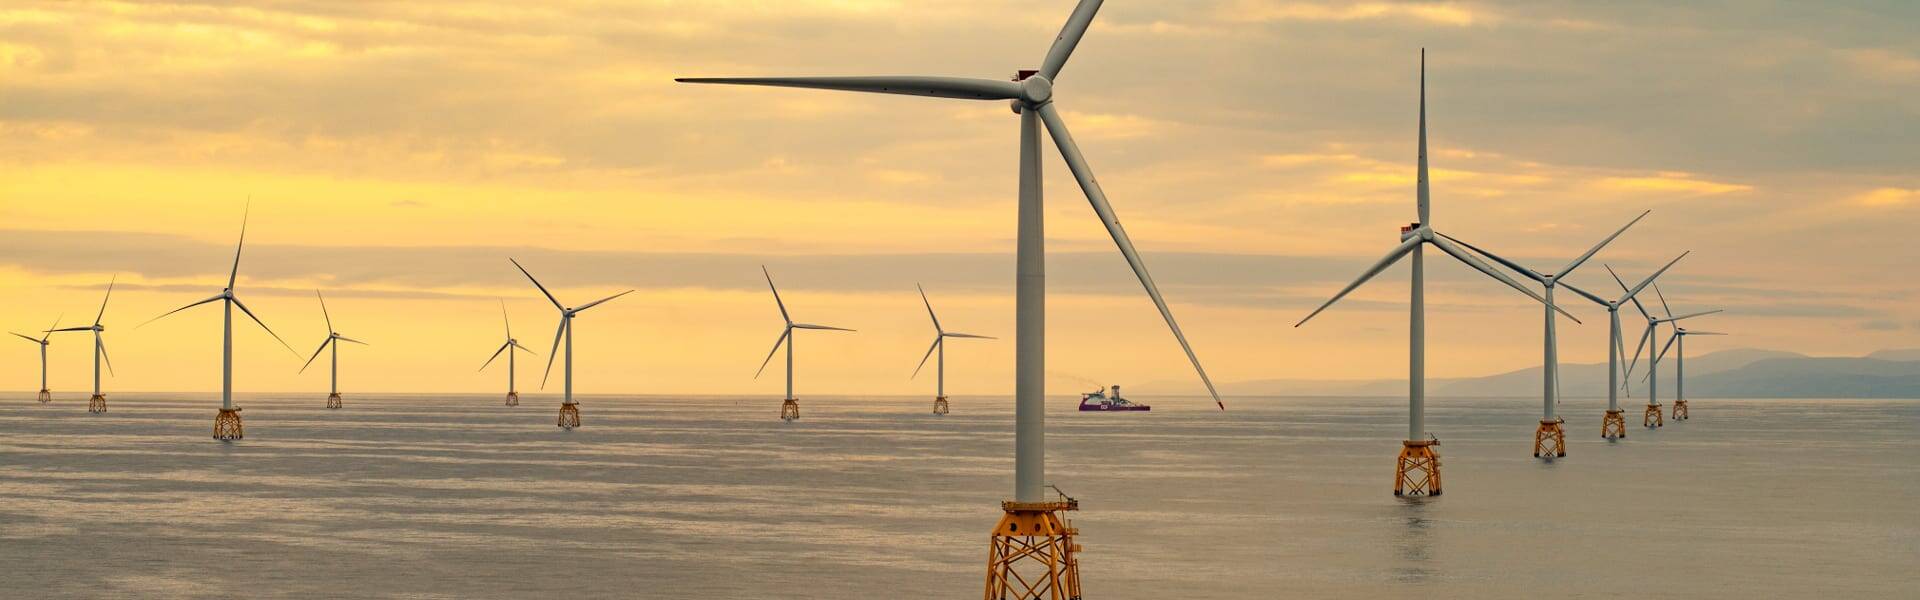 World’s largest wind turbine to be trialled in the UK